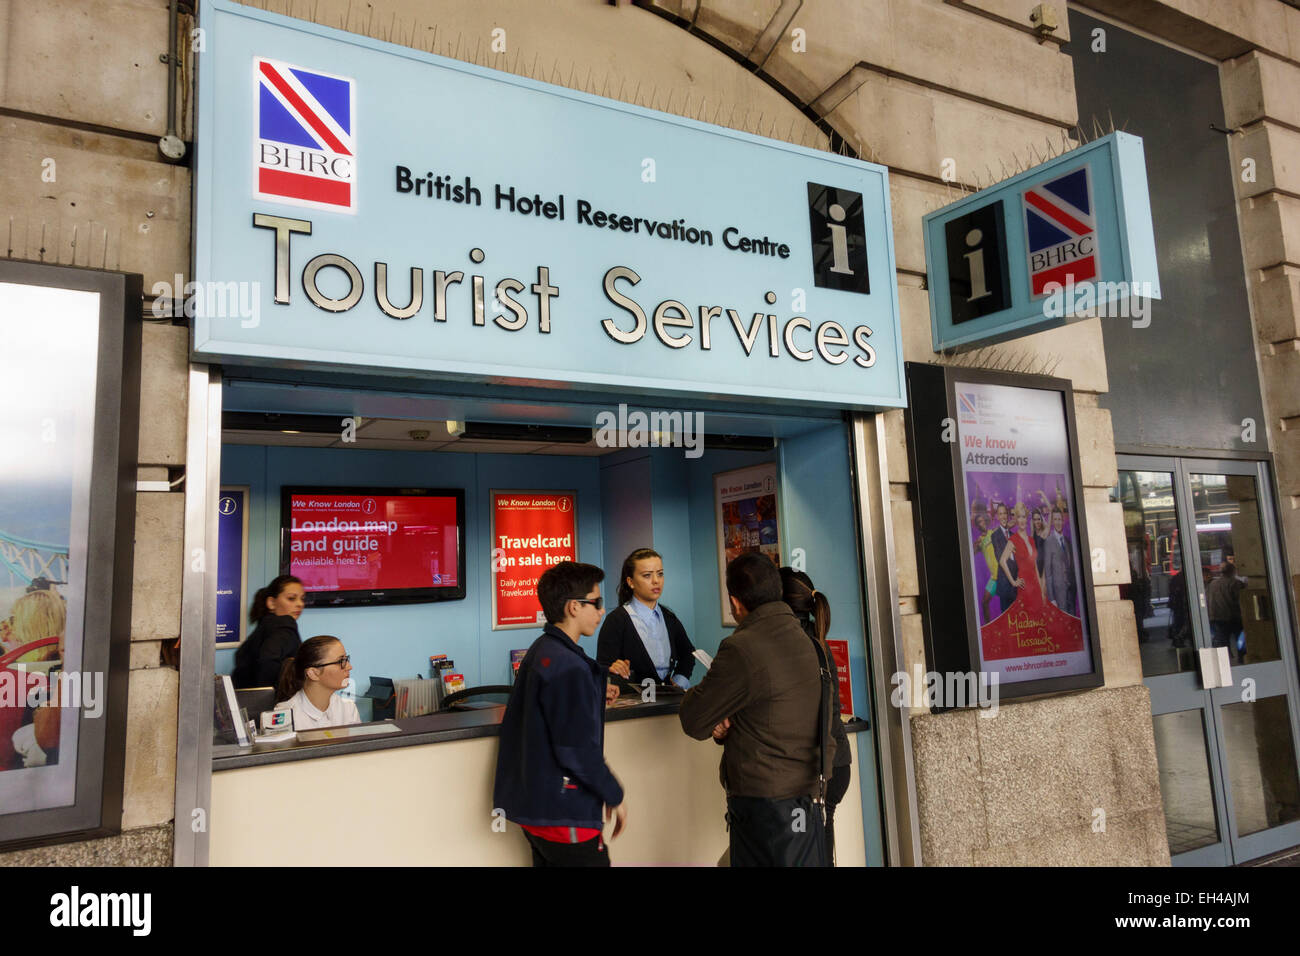 British Hotel Reservation Centre at Victoria Railway Station in London, UK Stock Photo